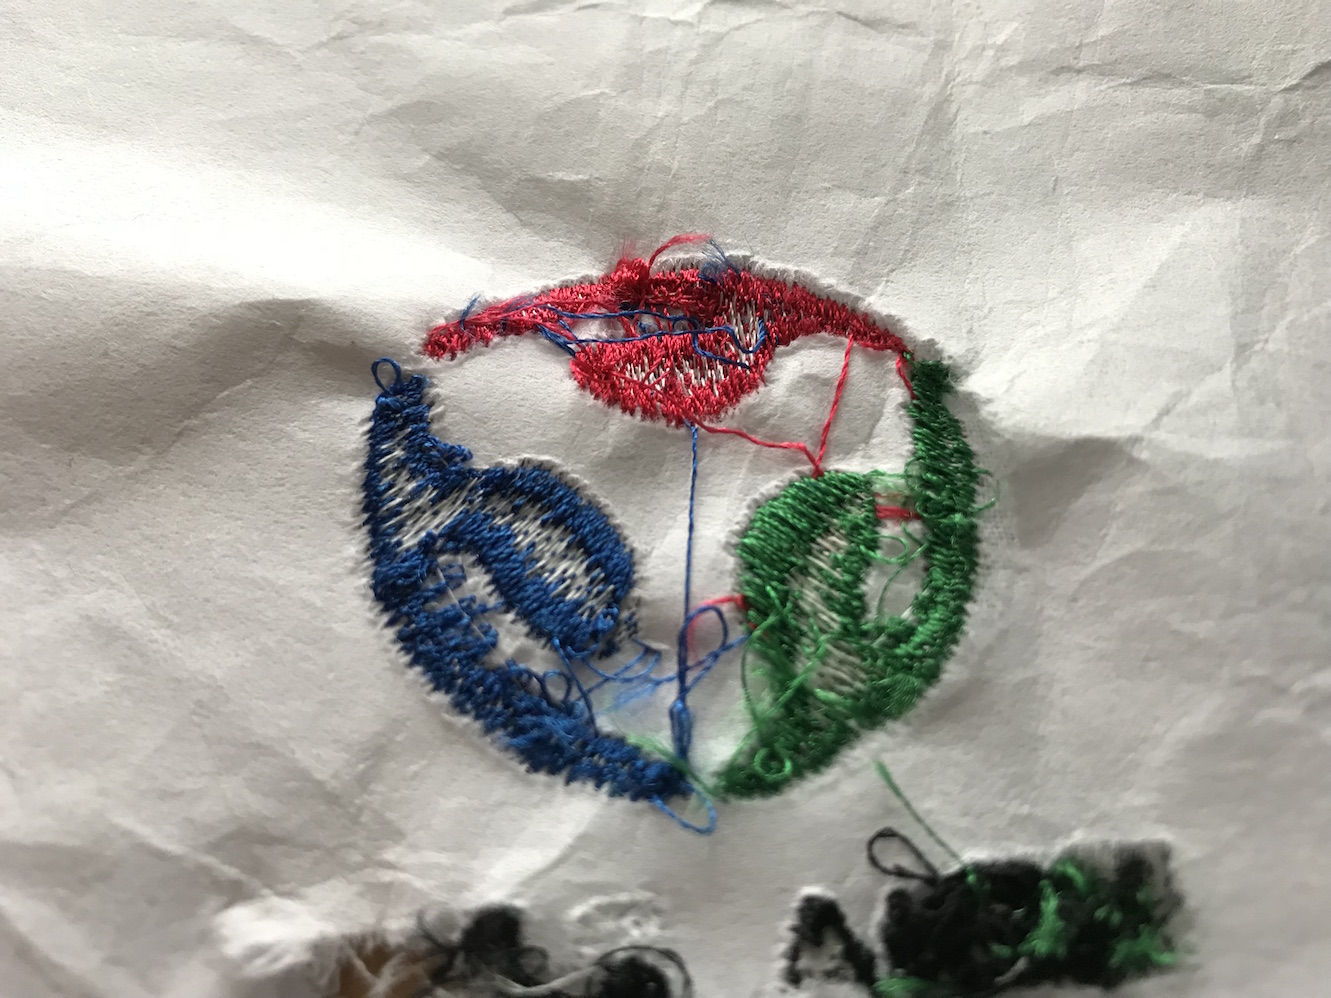 underside of embroidery